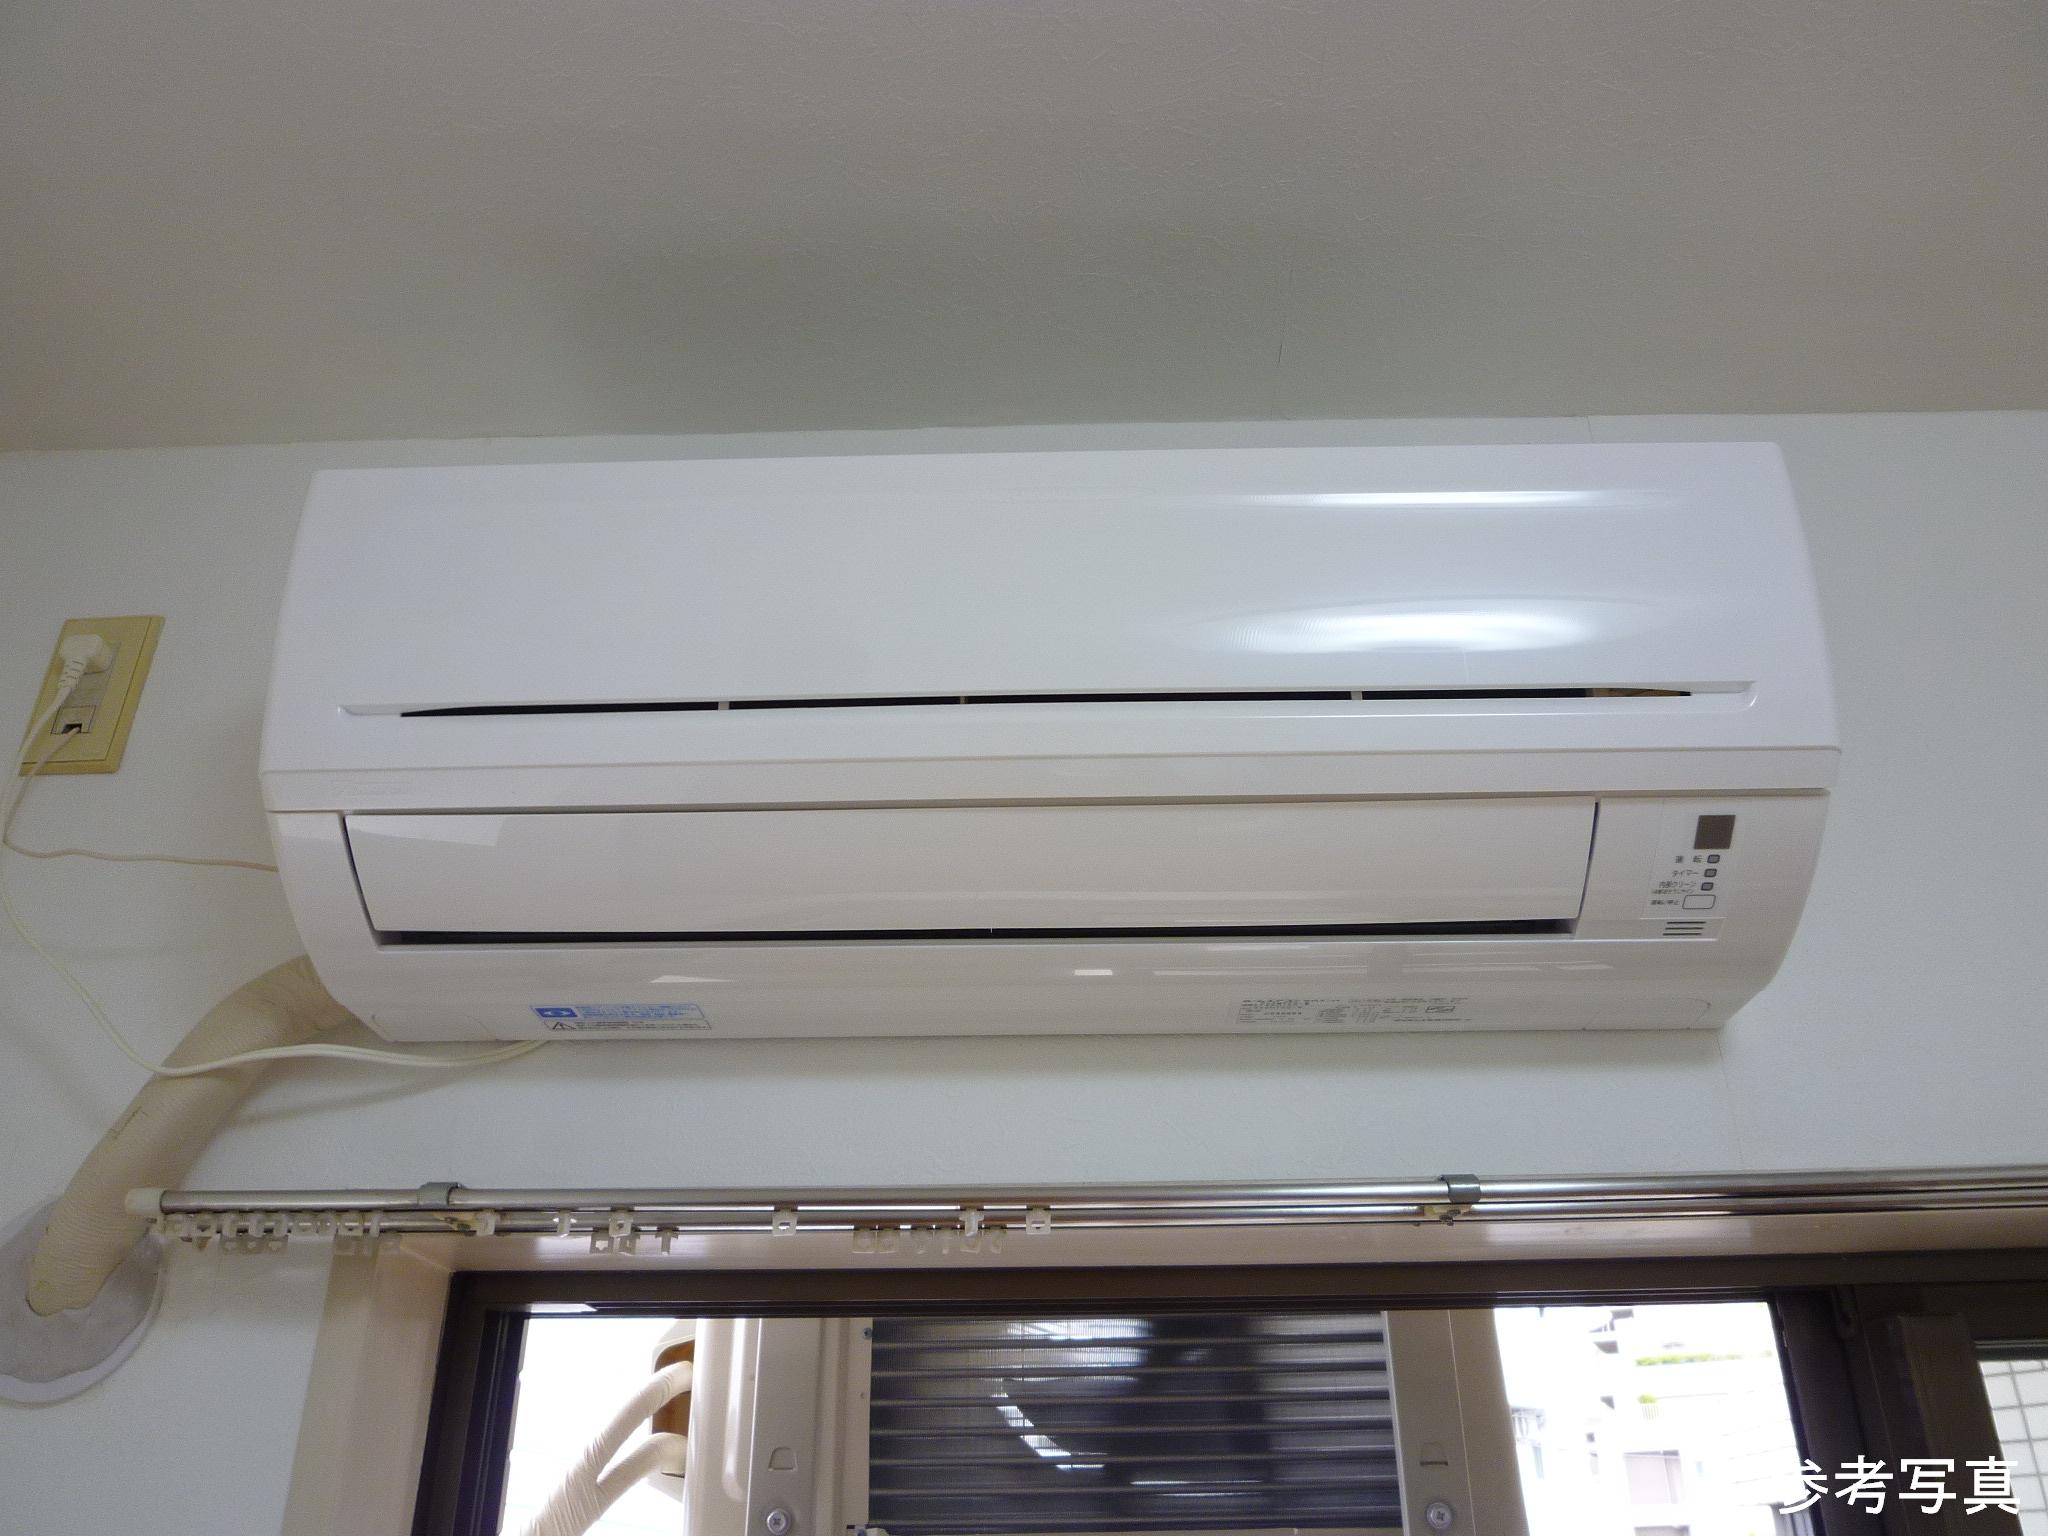 Other room space. Air conditioning (reference photograph)